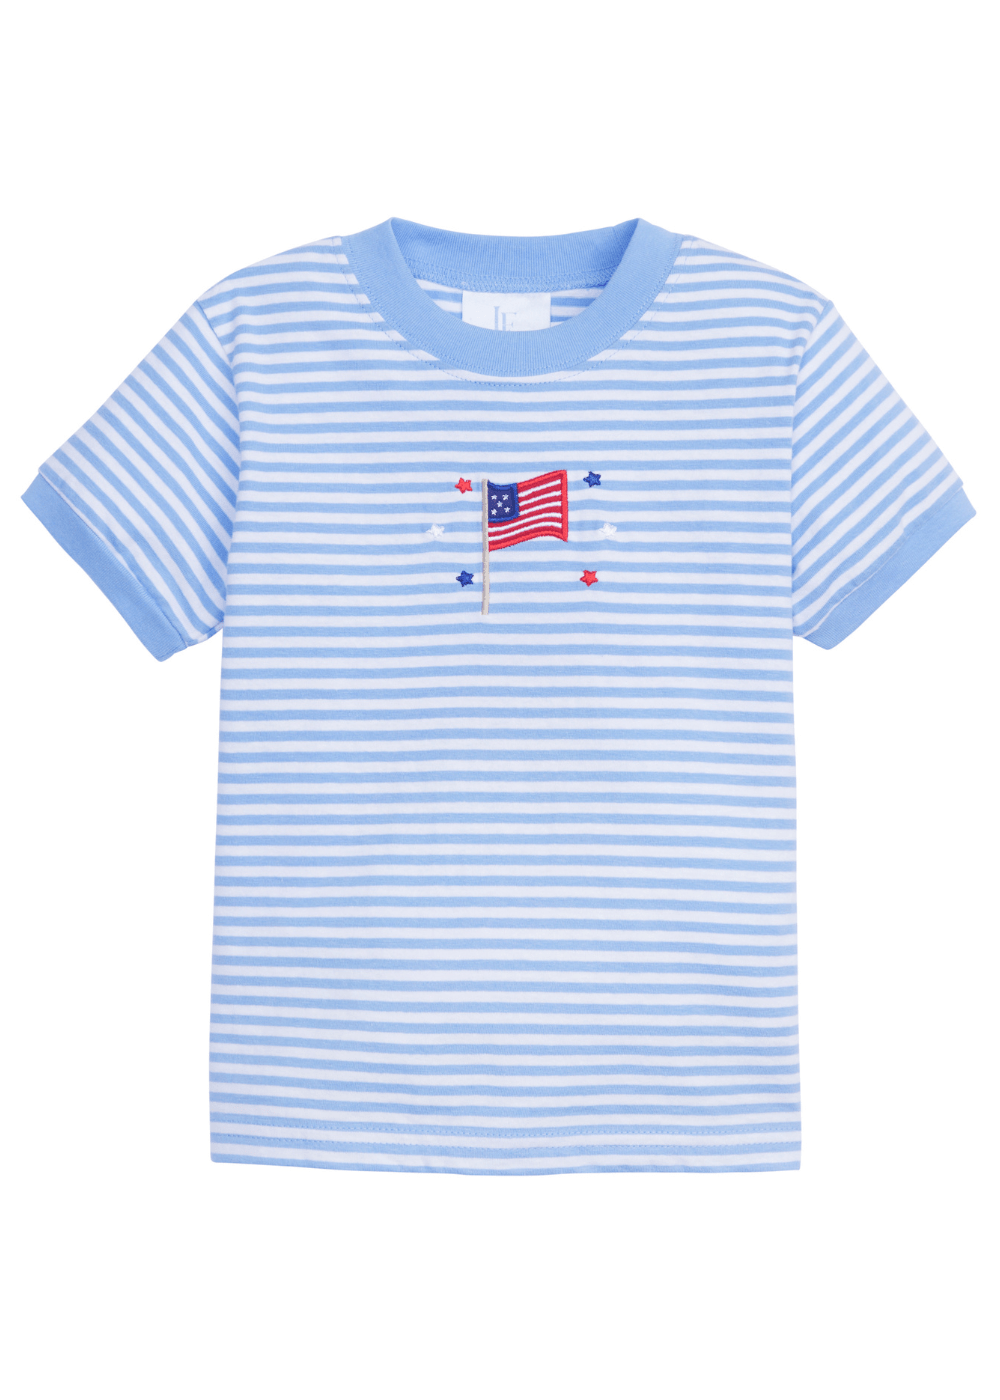 classic childrens clothing boys blue and white striped t-shirt with american flag applique